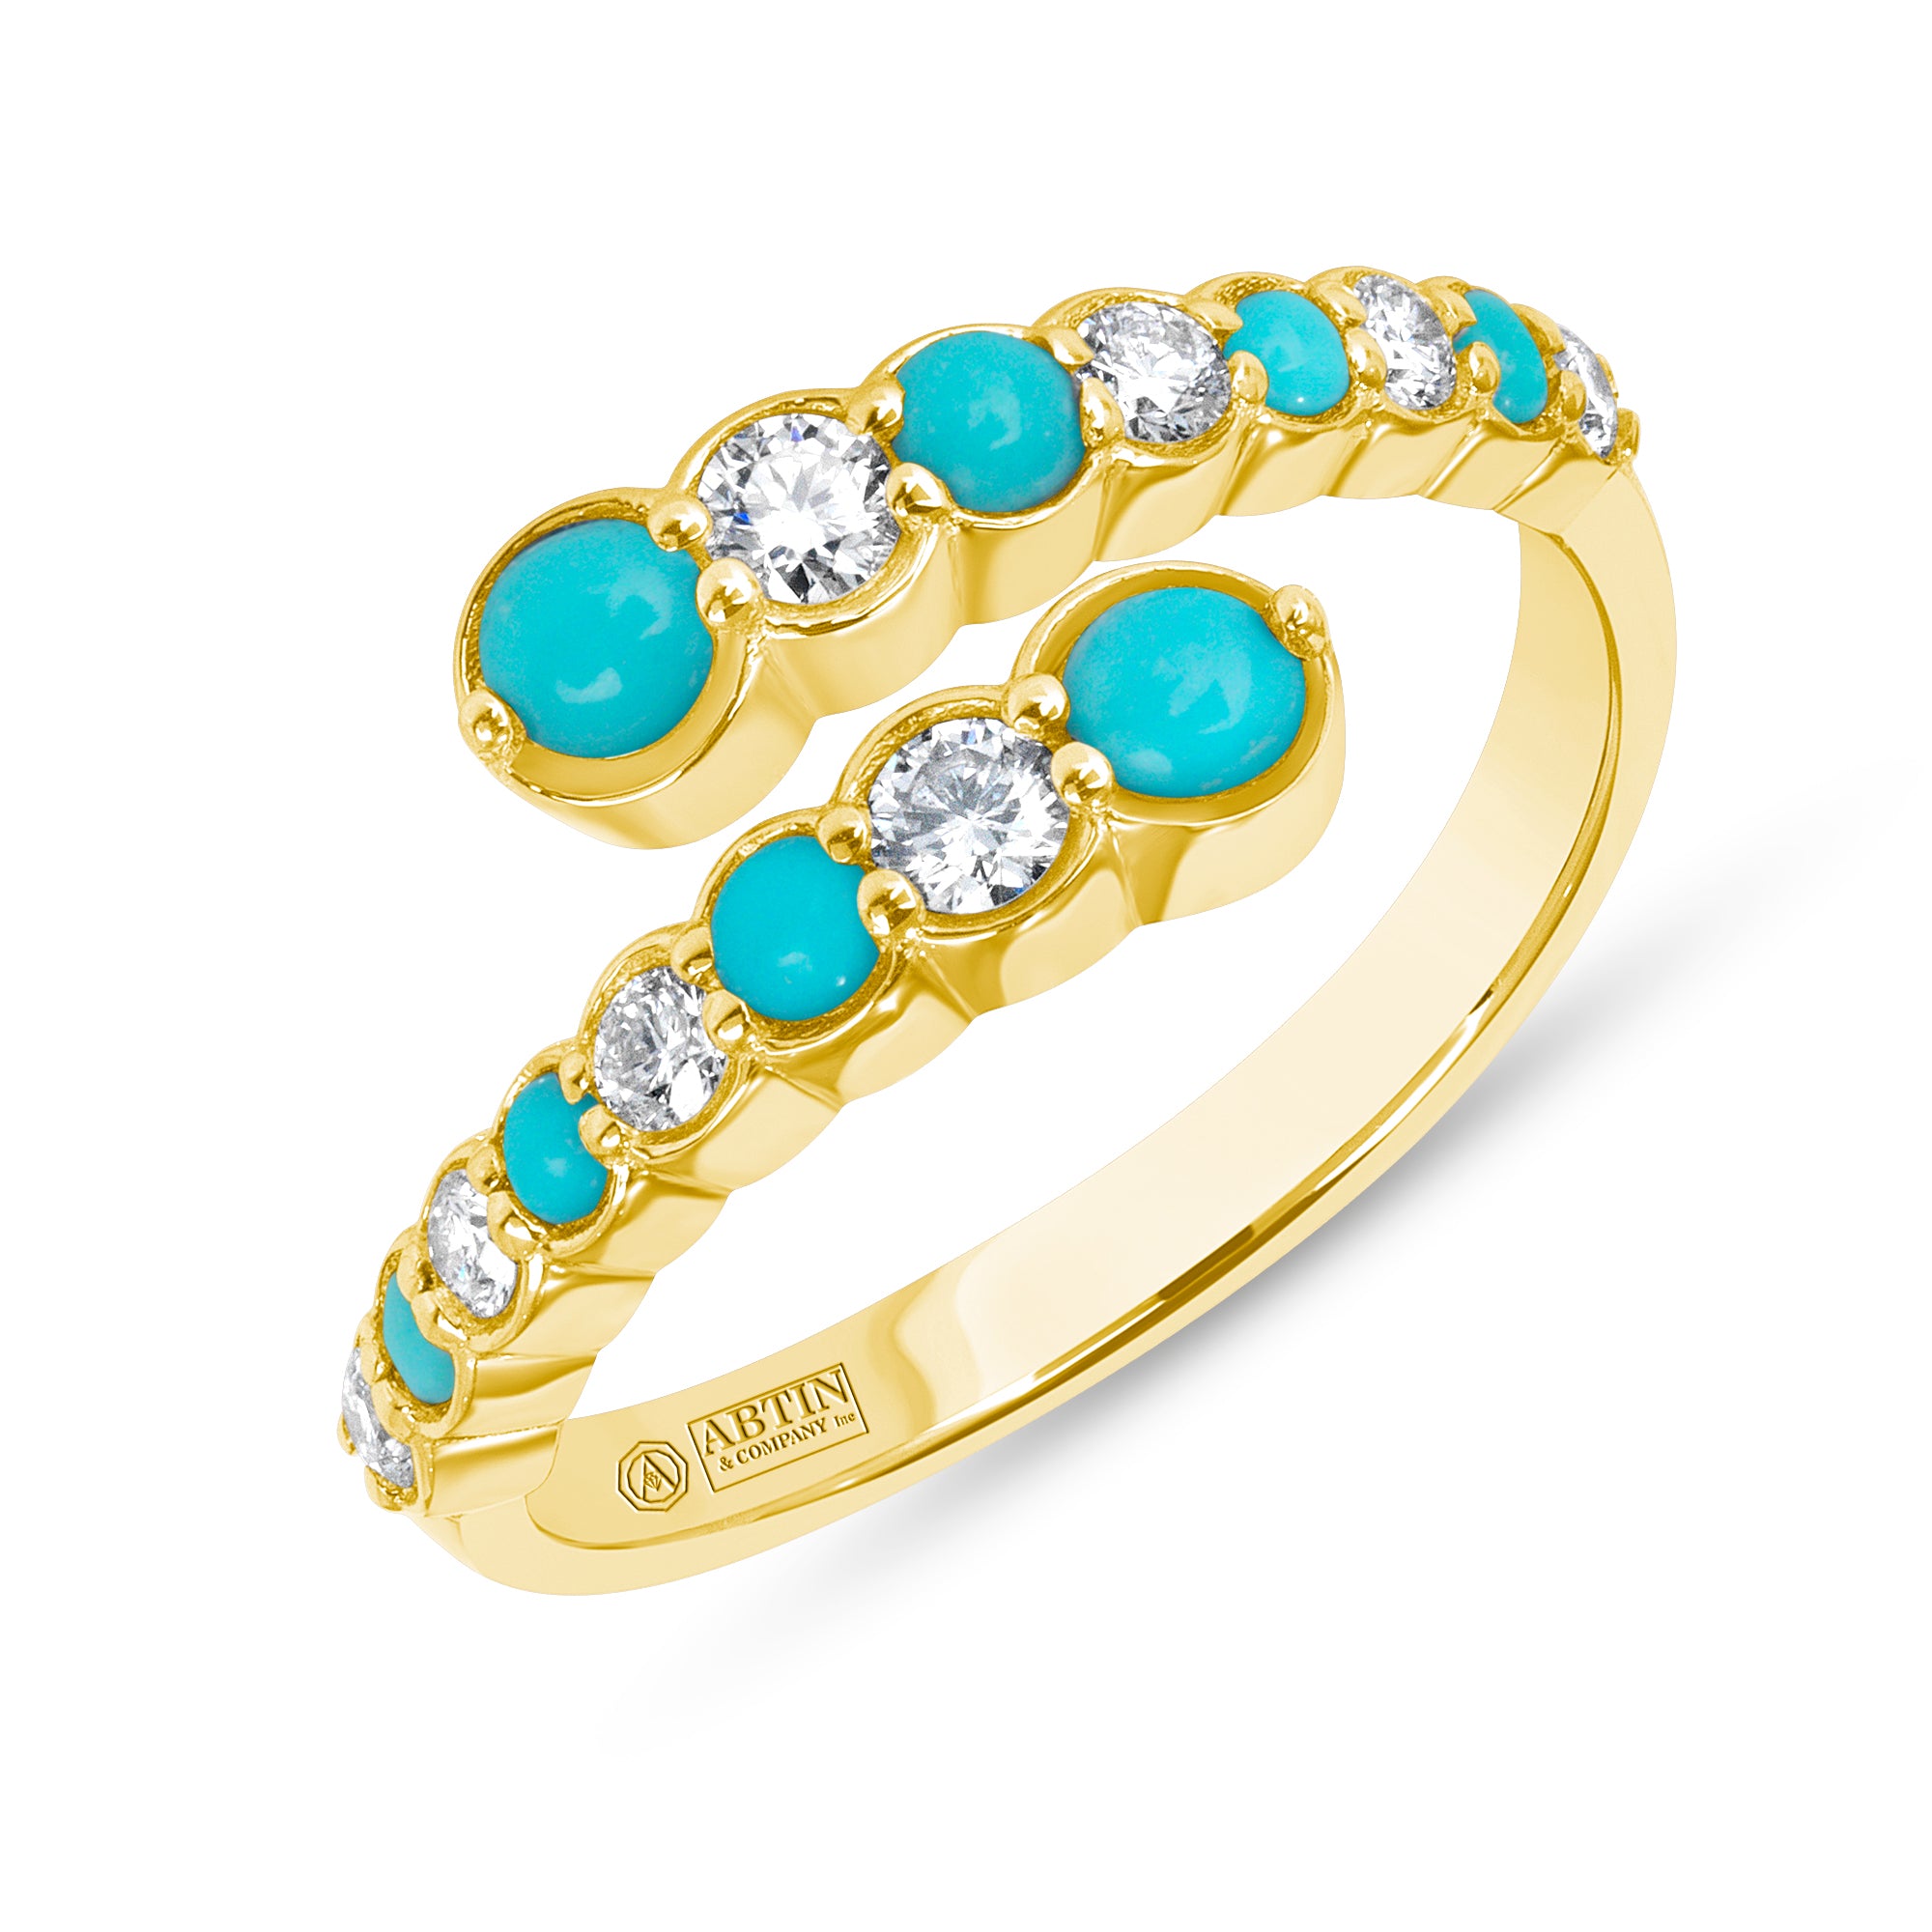 14K Gold Alternate Diamond & Turquoise Bezel Bypass Ring Band,  Rings & Stackable Bands, ABB-619V1Y-TQD, Color Stones, turquoise and diamond bypass ring, Belarino